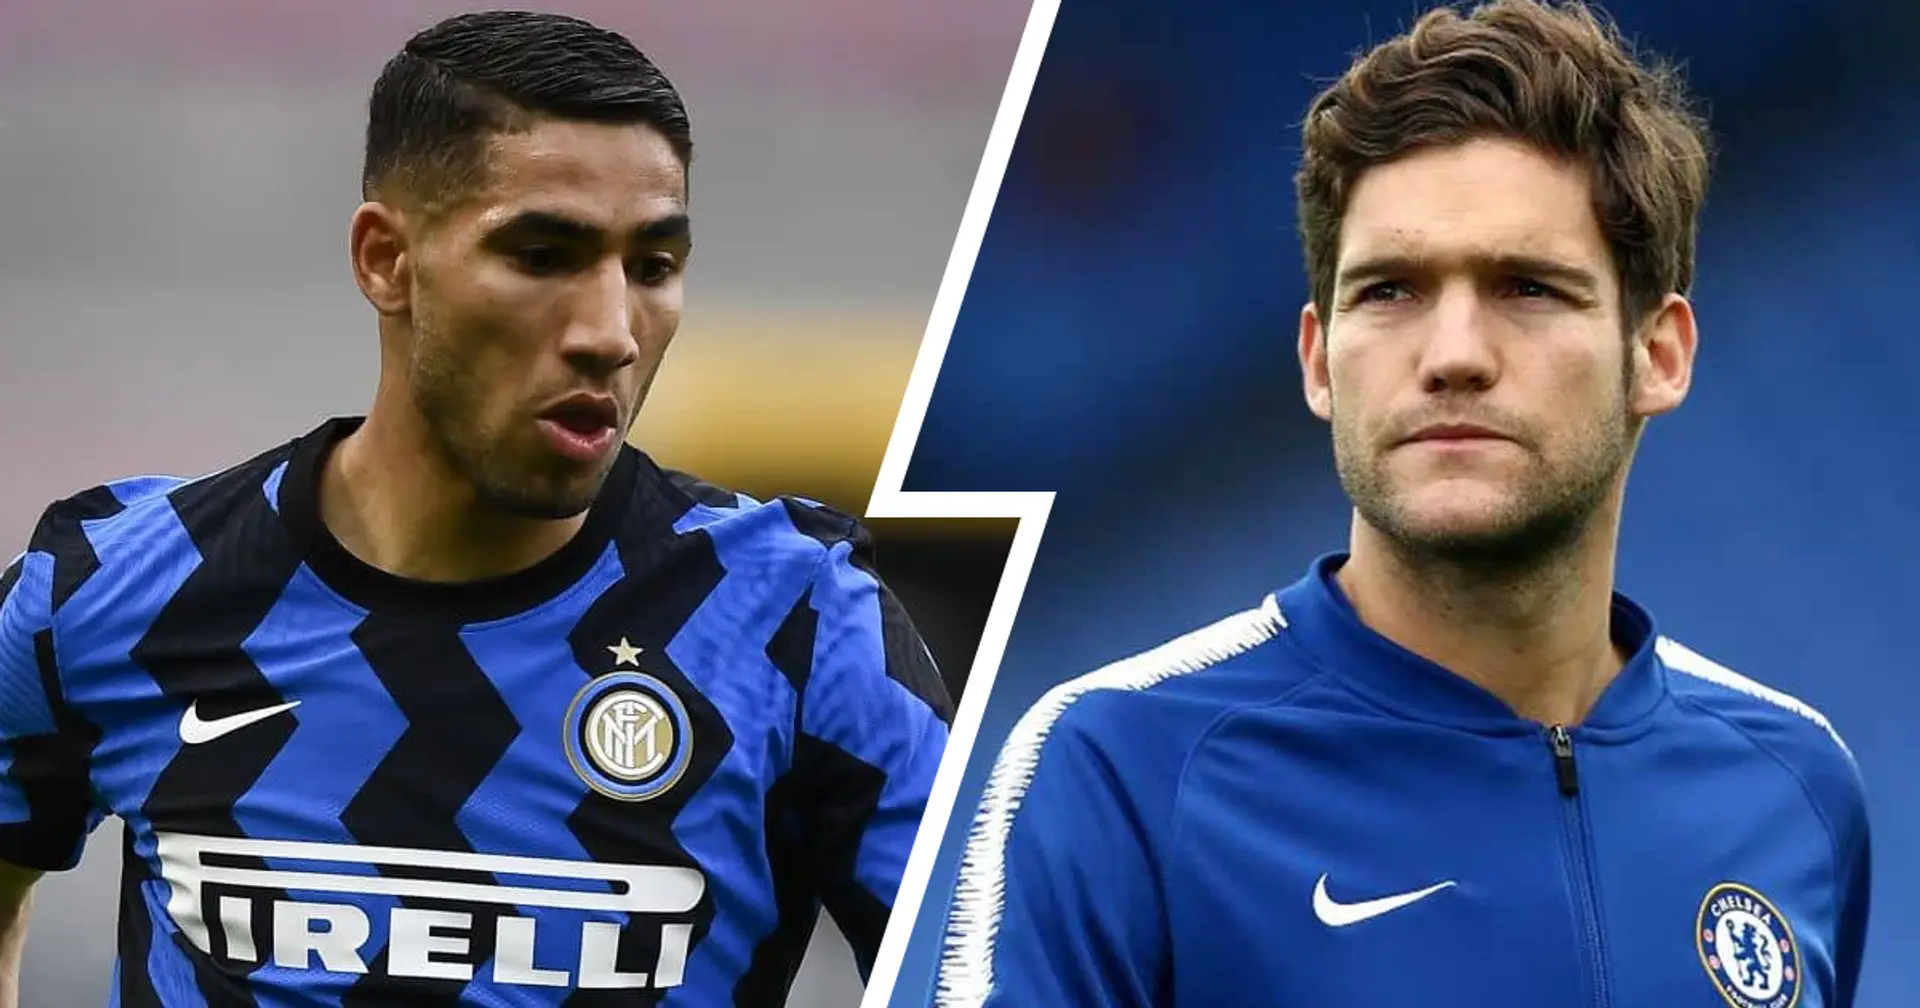 Marcos Alonso could be included in deal for Hakimi, Chelsea favorites: Calciomercato (reliability: 3 stars)